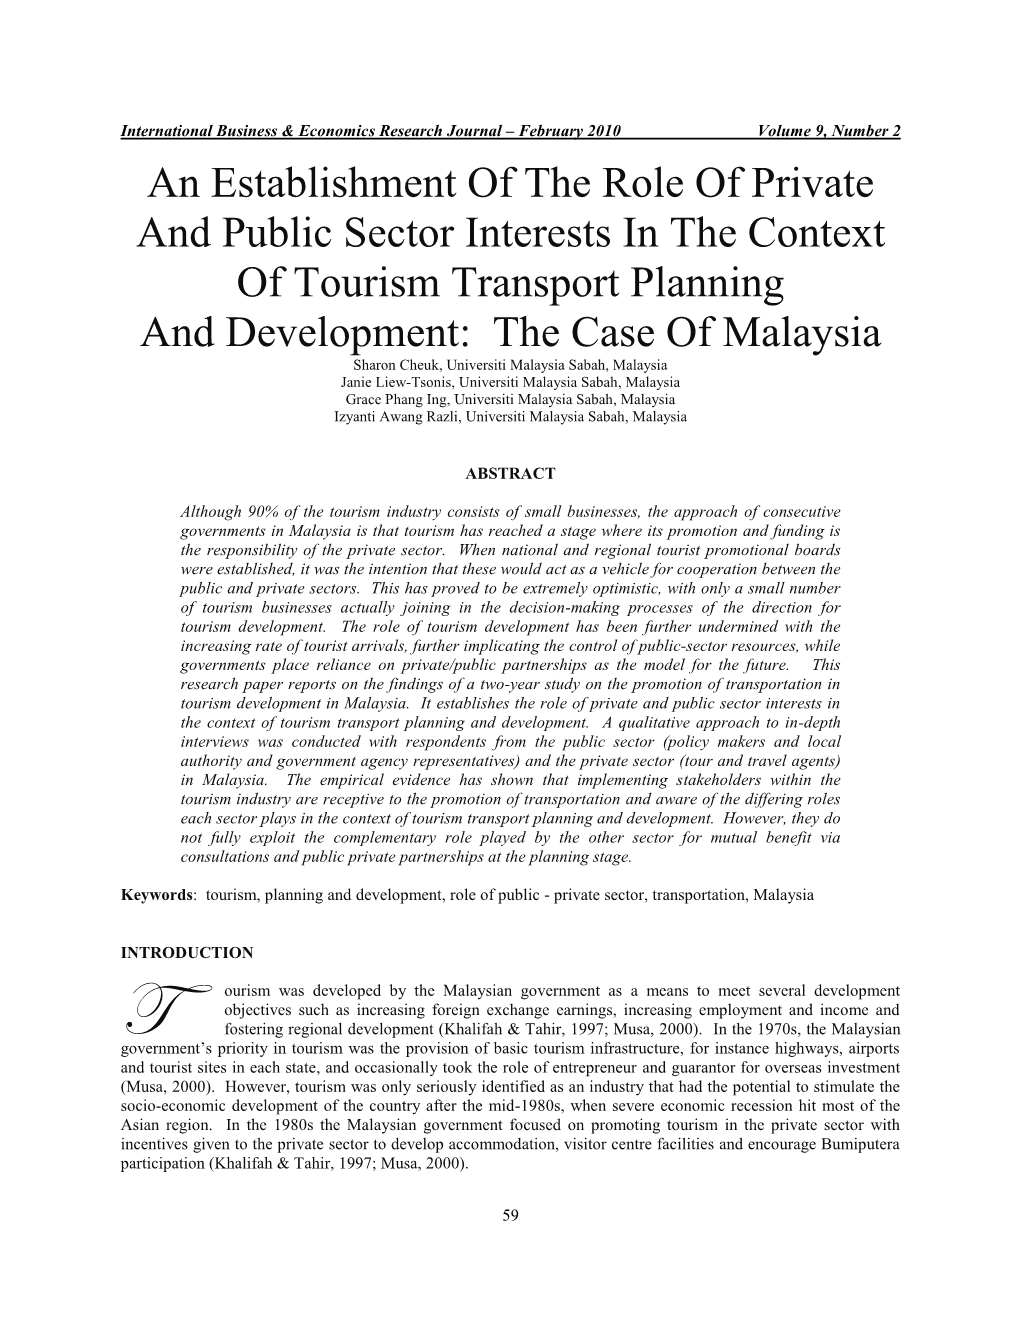 An Establishment of the Role of Private and Public Sector Interests